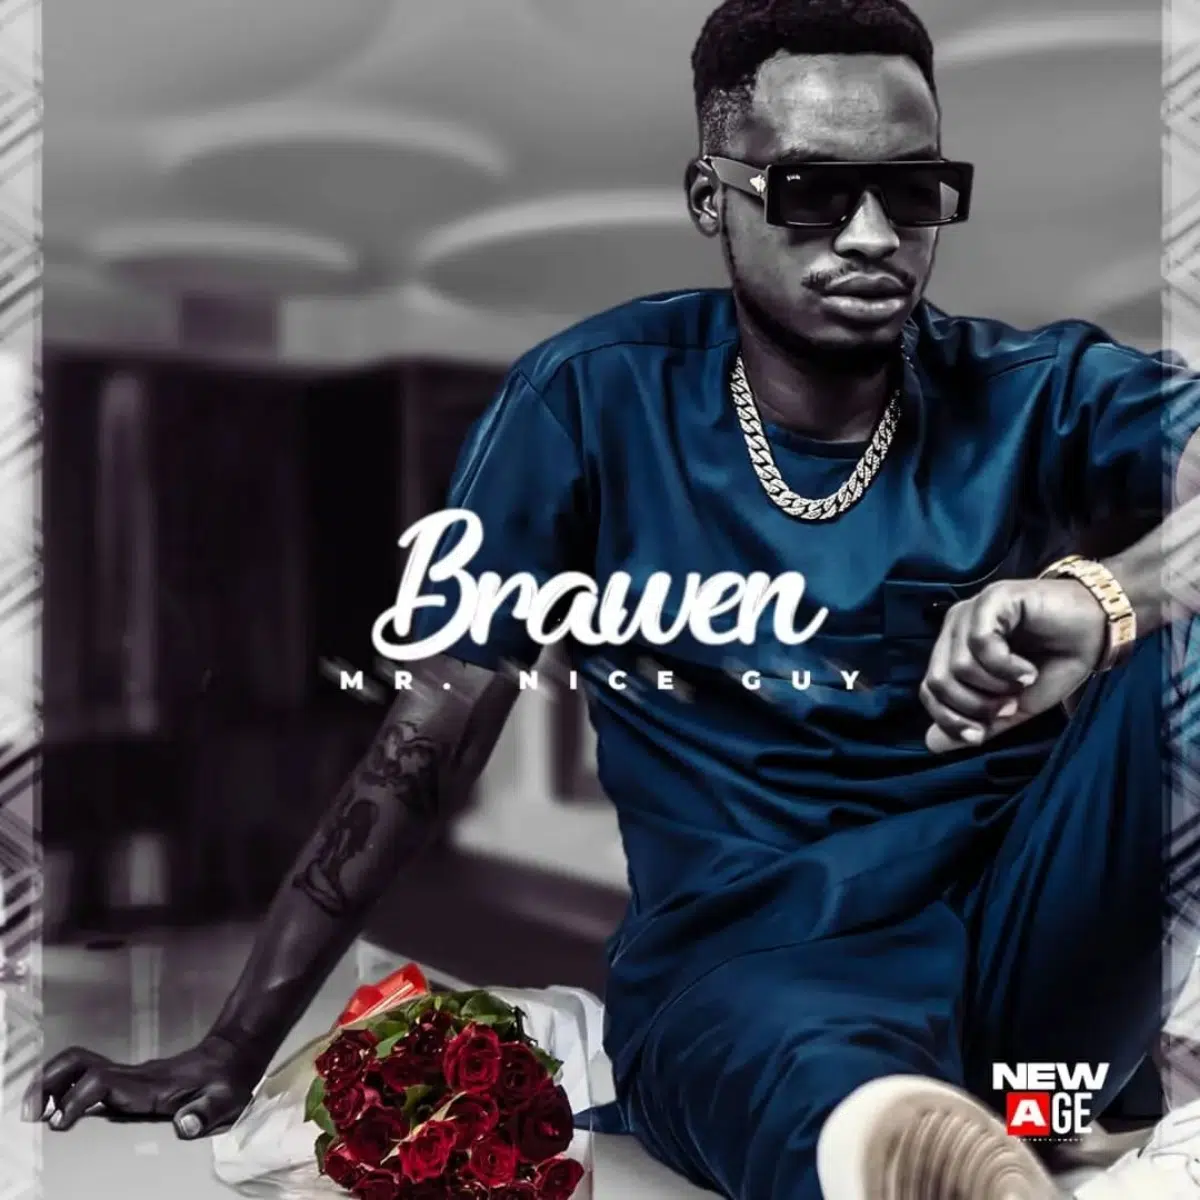 DOWNLOAD: Brawen Ft Koby – “Soldiers” Mp3